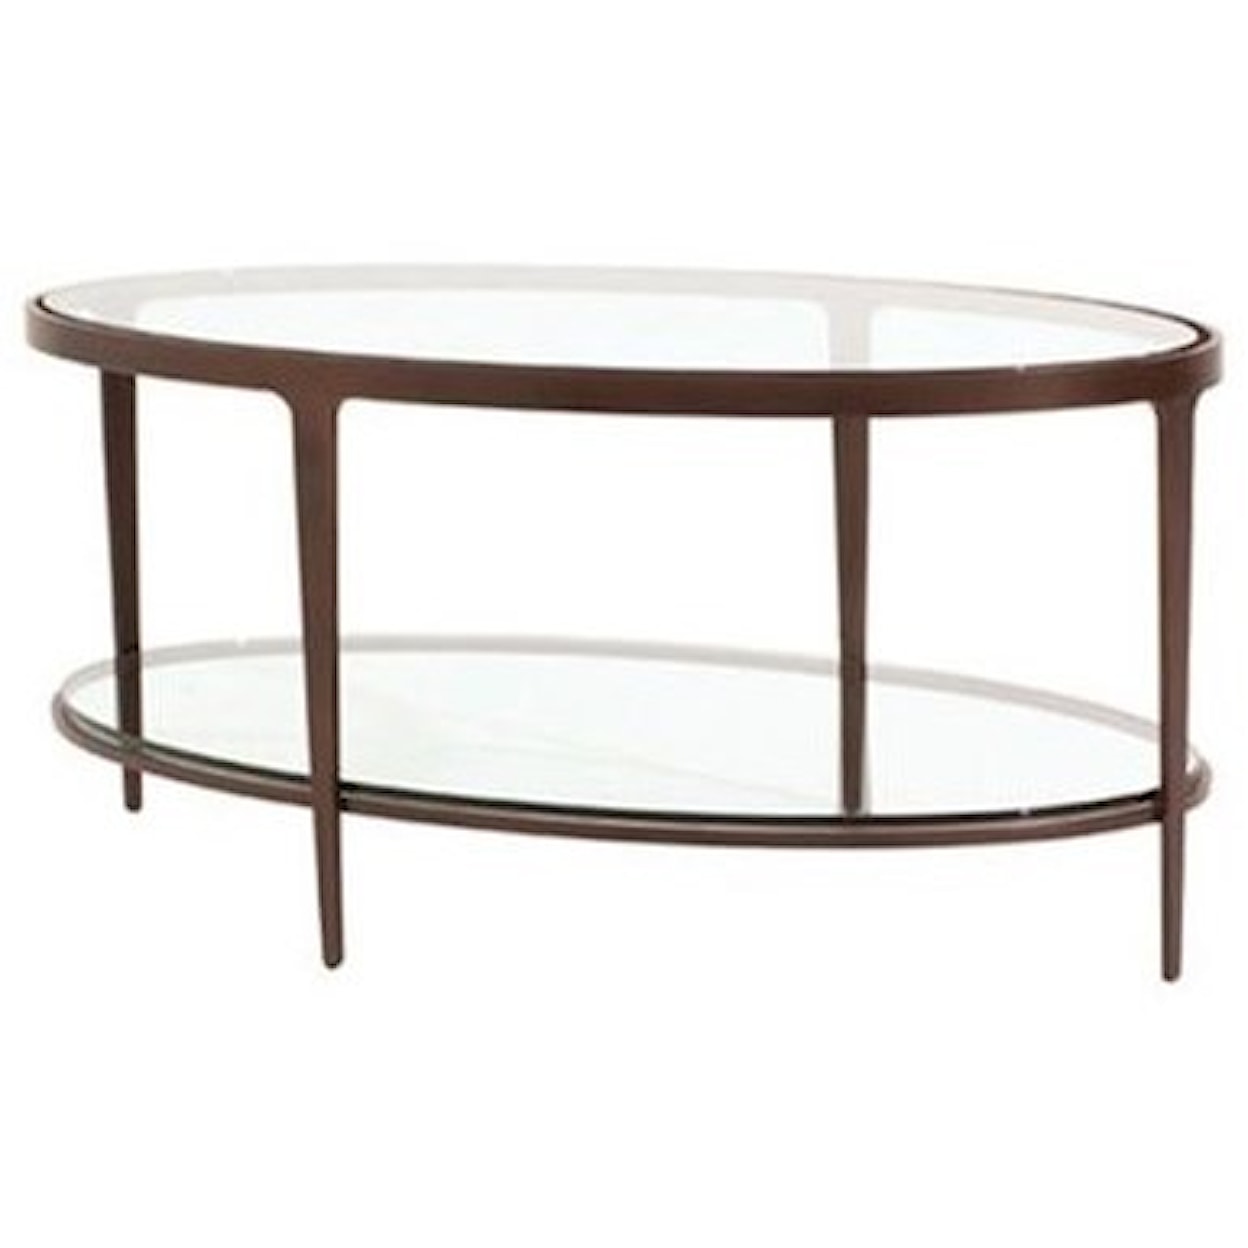 Charleston Forge Dining Room Accents Ellipse Cocktail Table